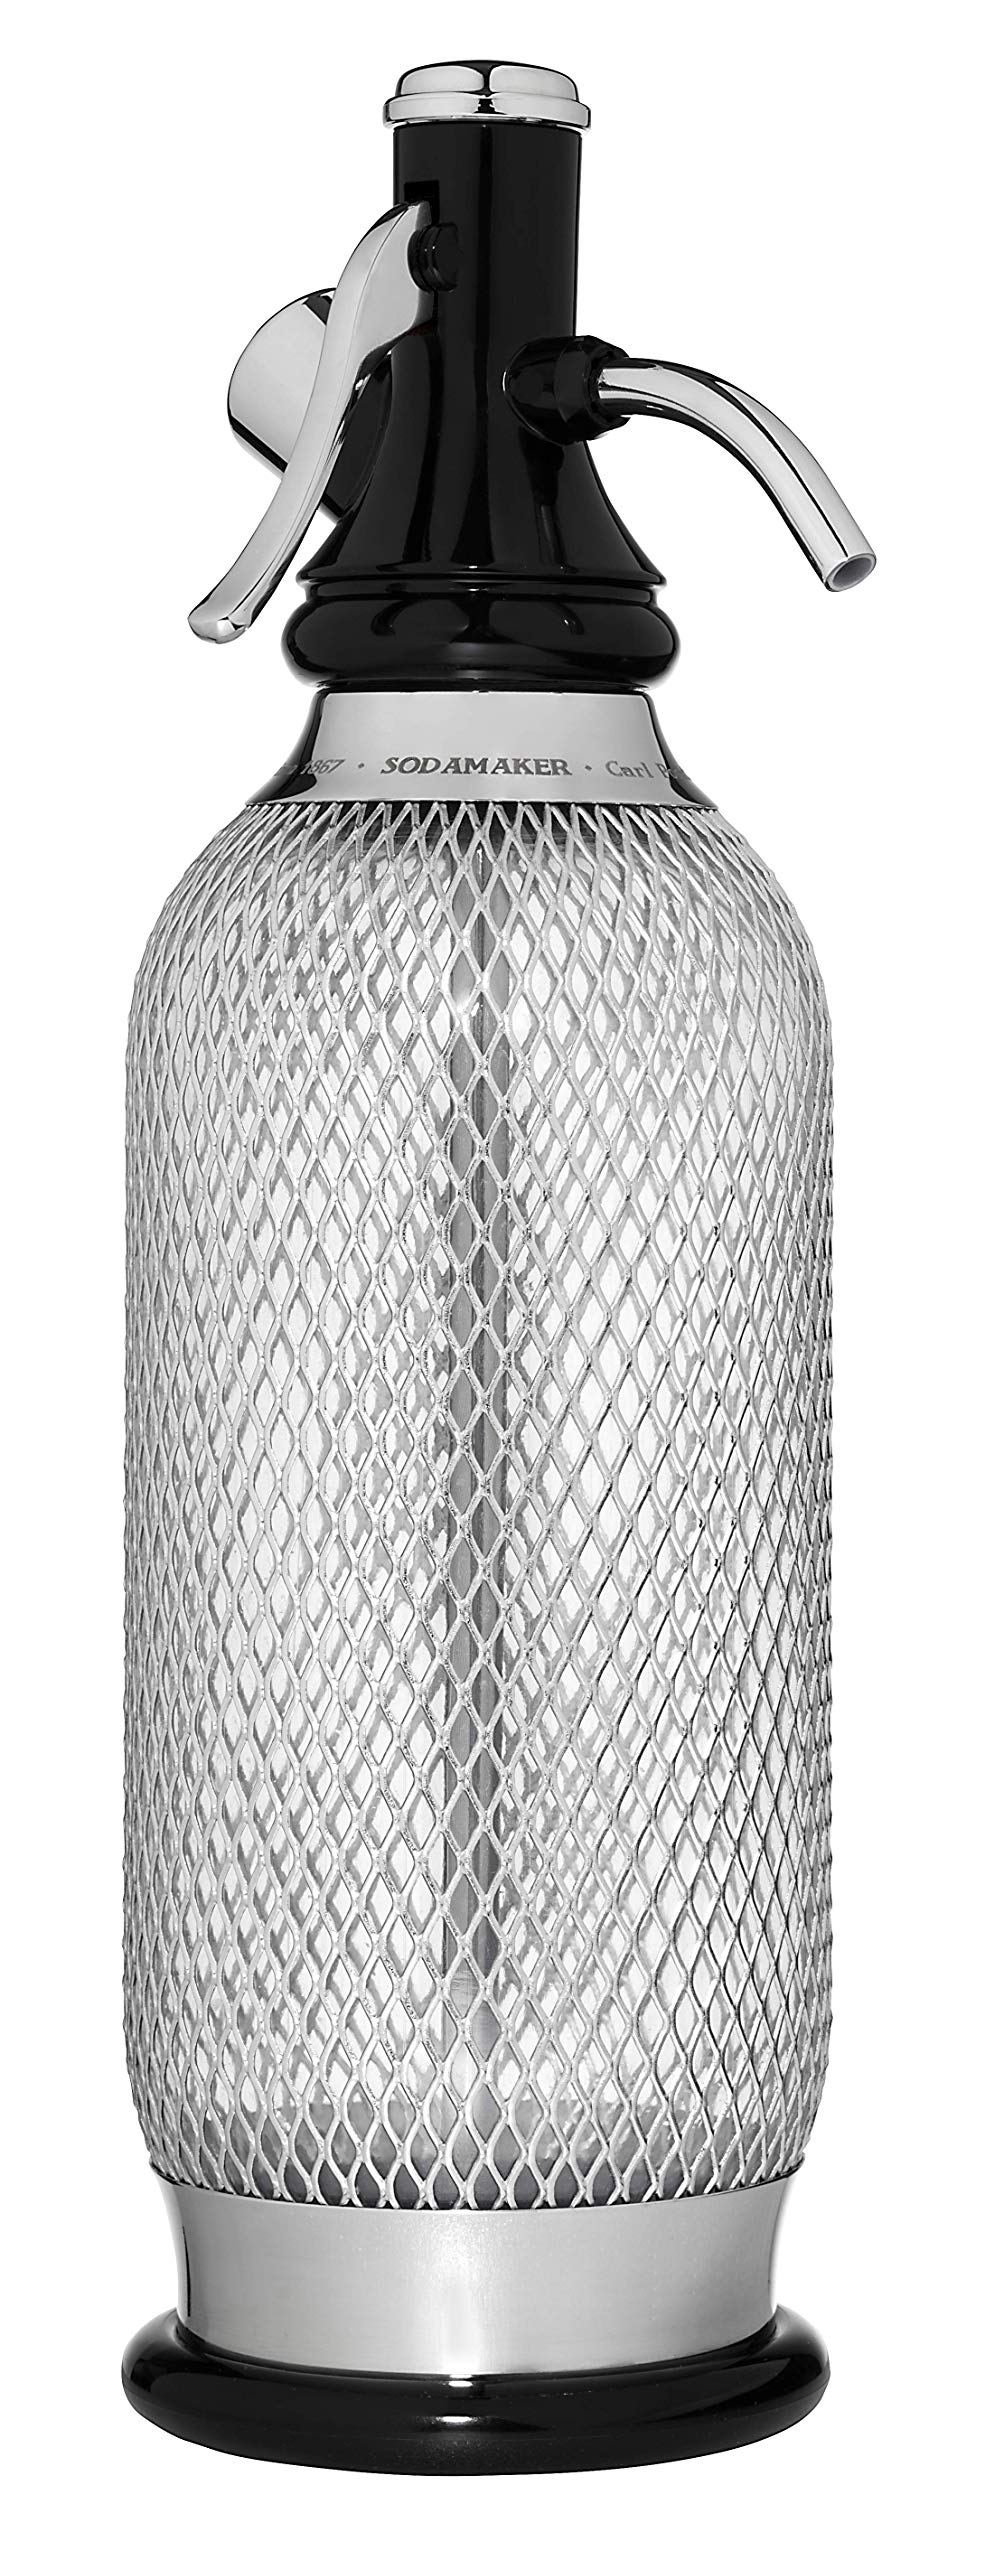 iSi North America iSi classic MeshSodamaker for Making carbonating Beverages, 1 Quart, Stainless Steel